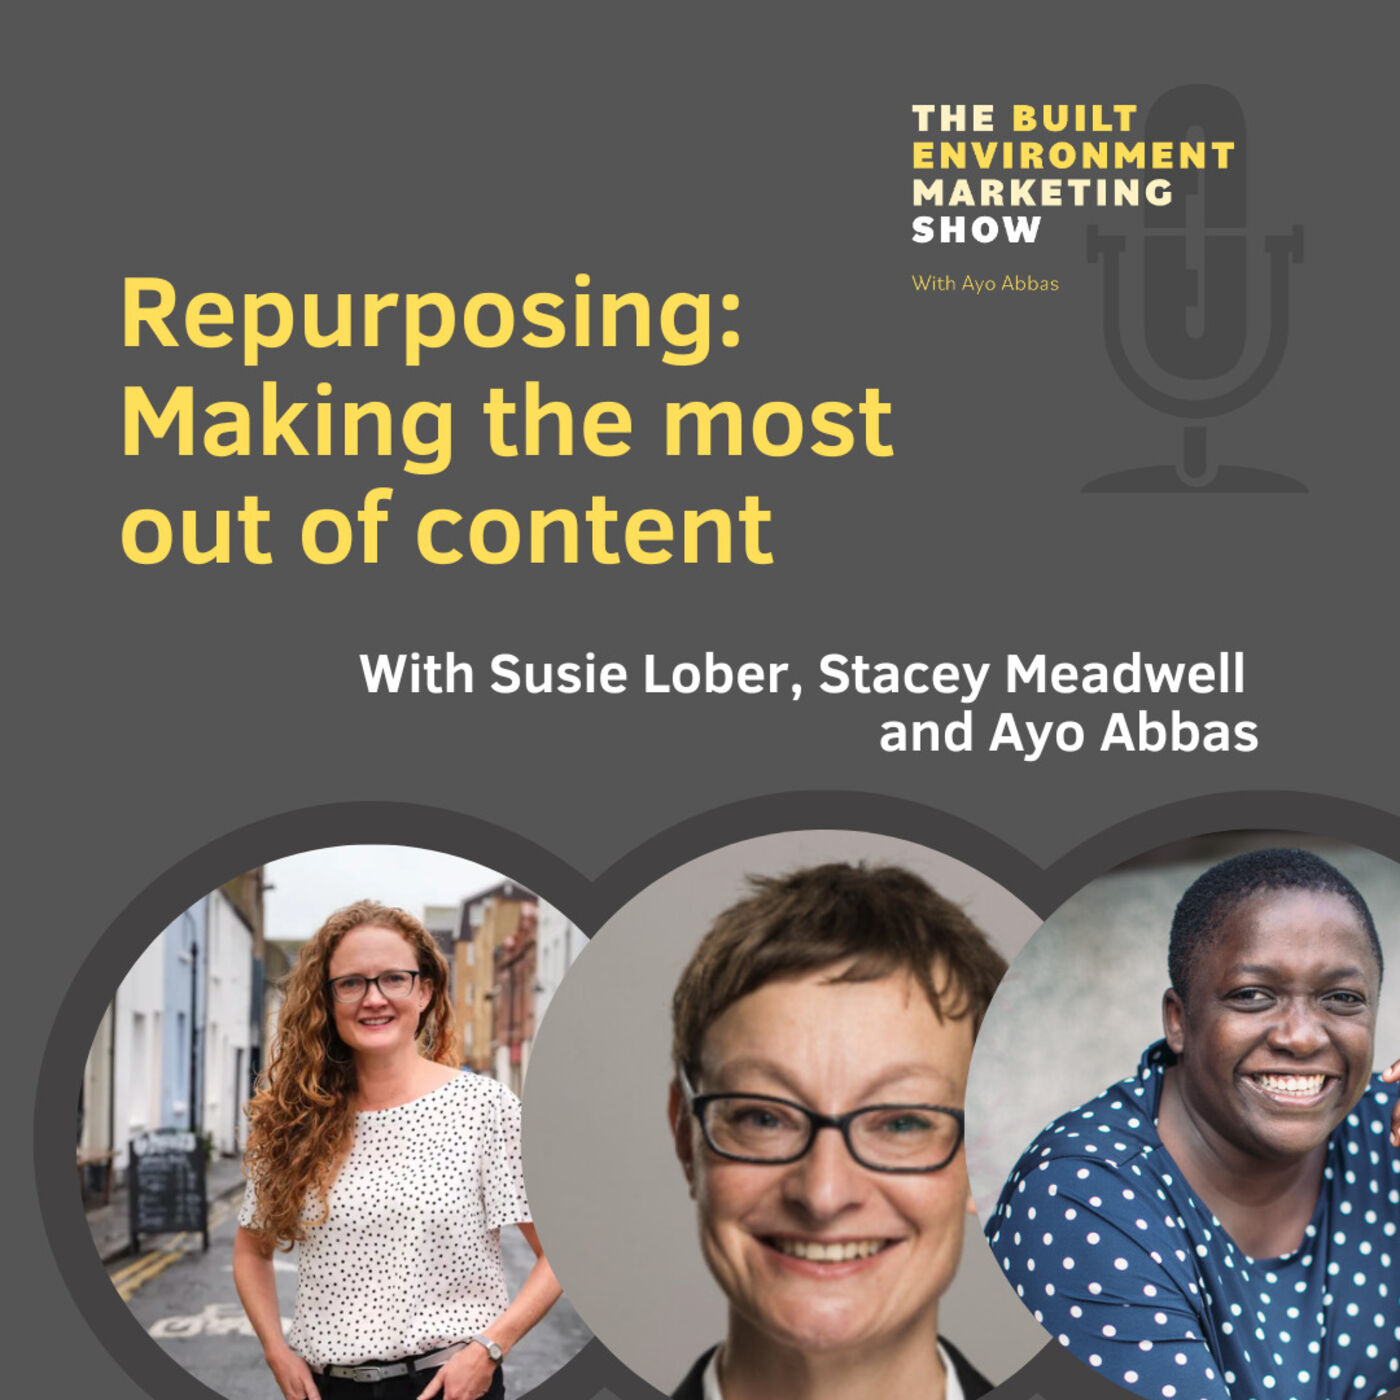 Ep 50: Repurposing and making the most of content with Stacey Meadwell, Susie Lober and Ayo Abbas